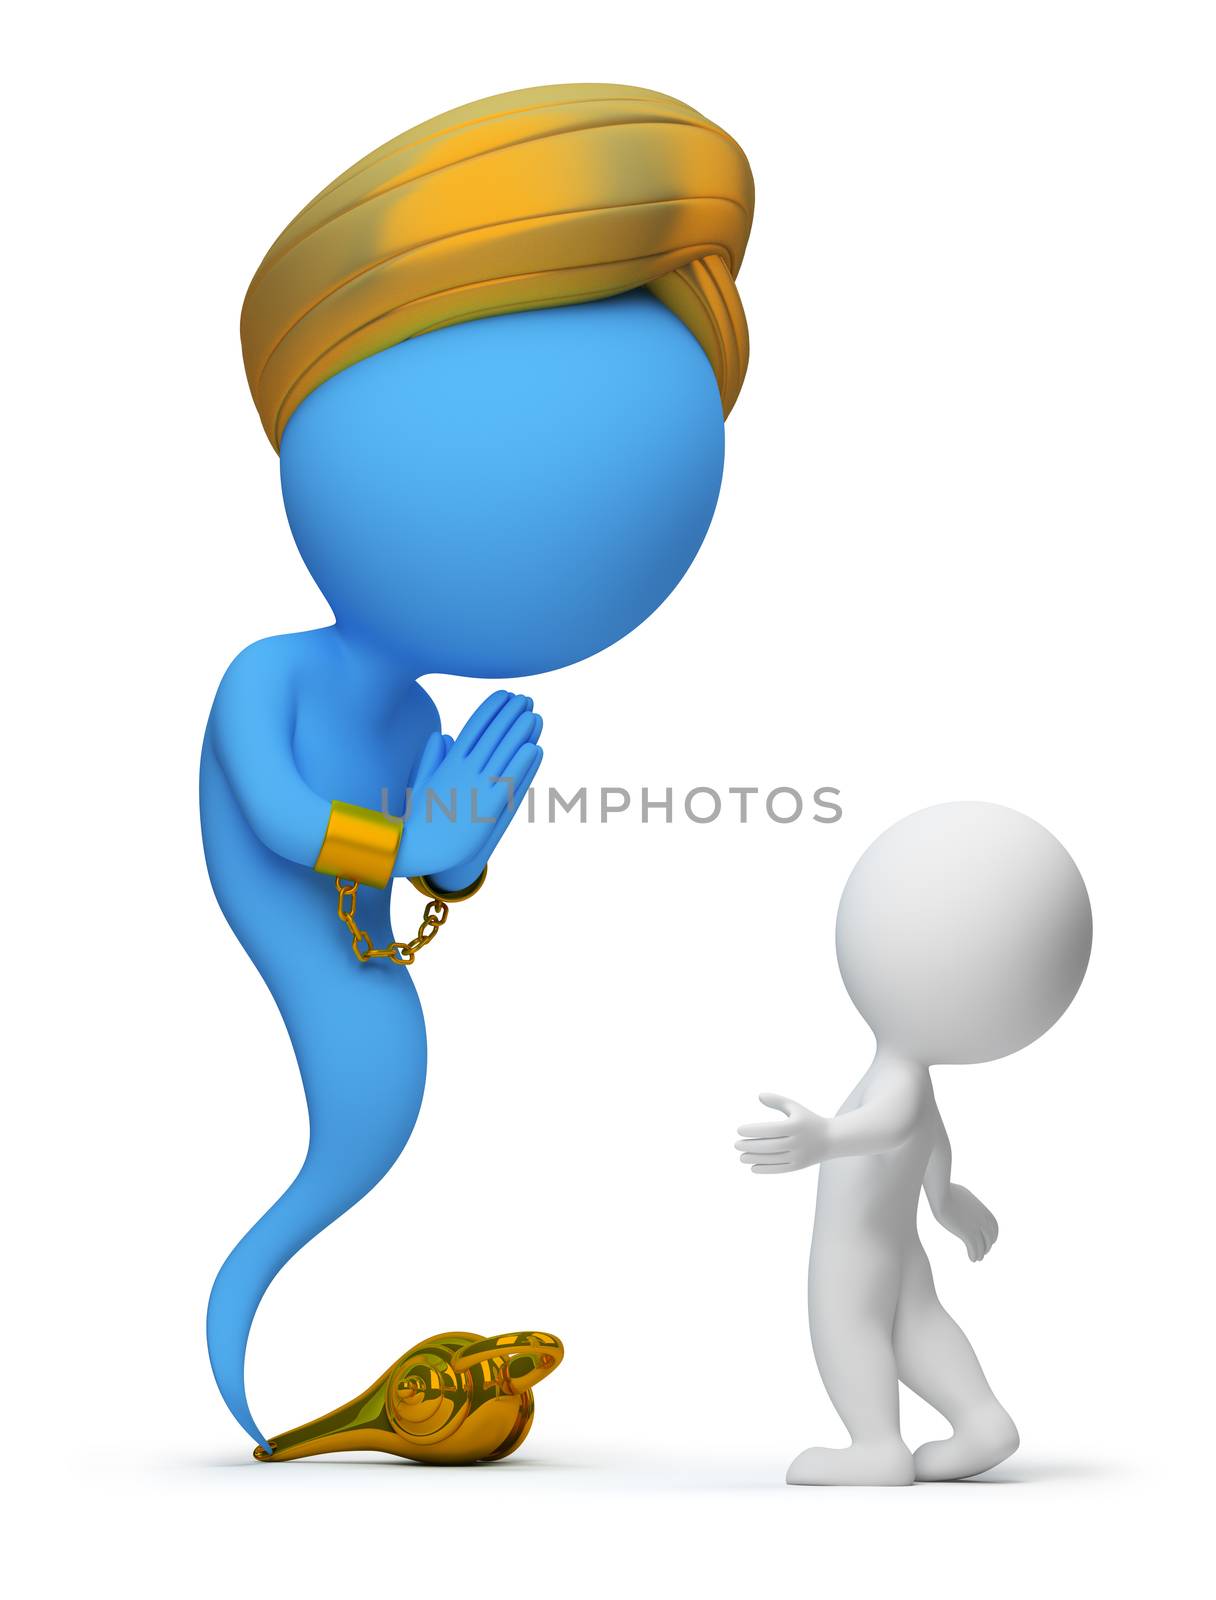 3d small people and the jinn appeared from a magic lamp. 3d image. Isolated white background.